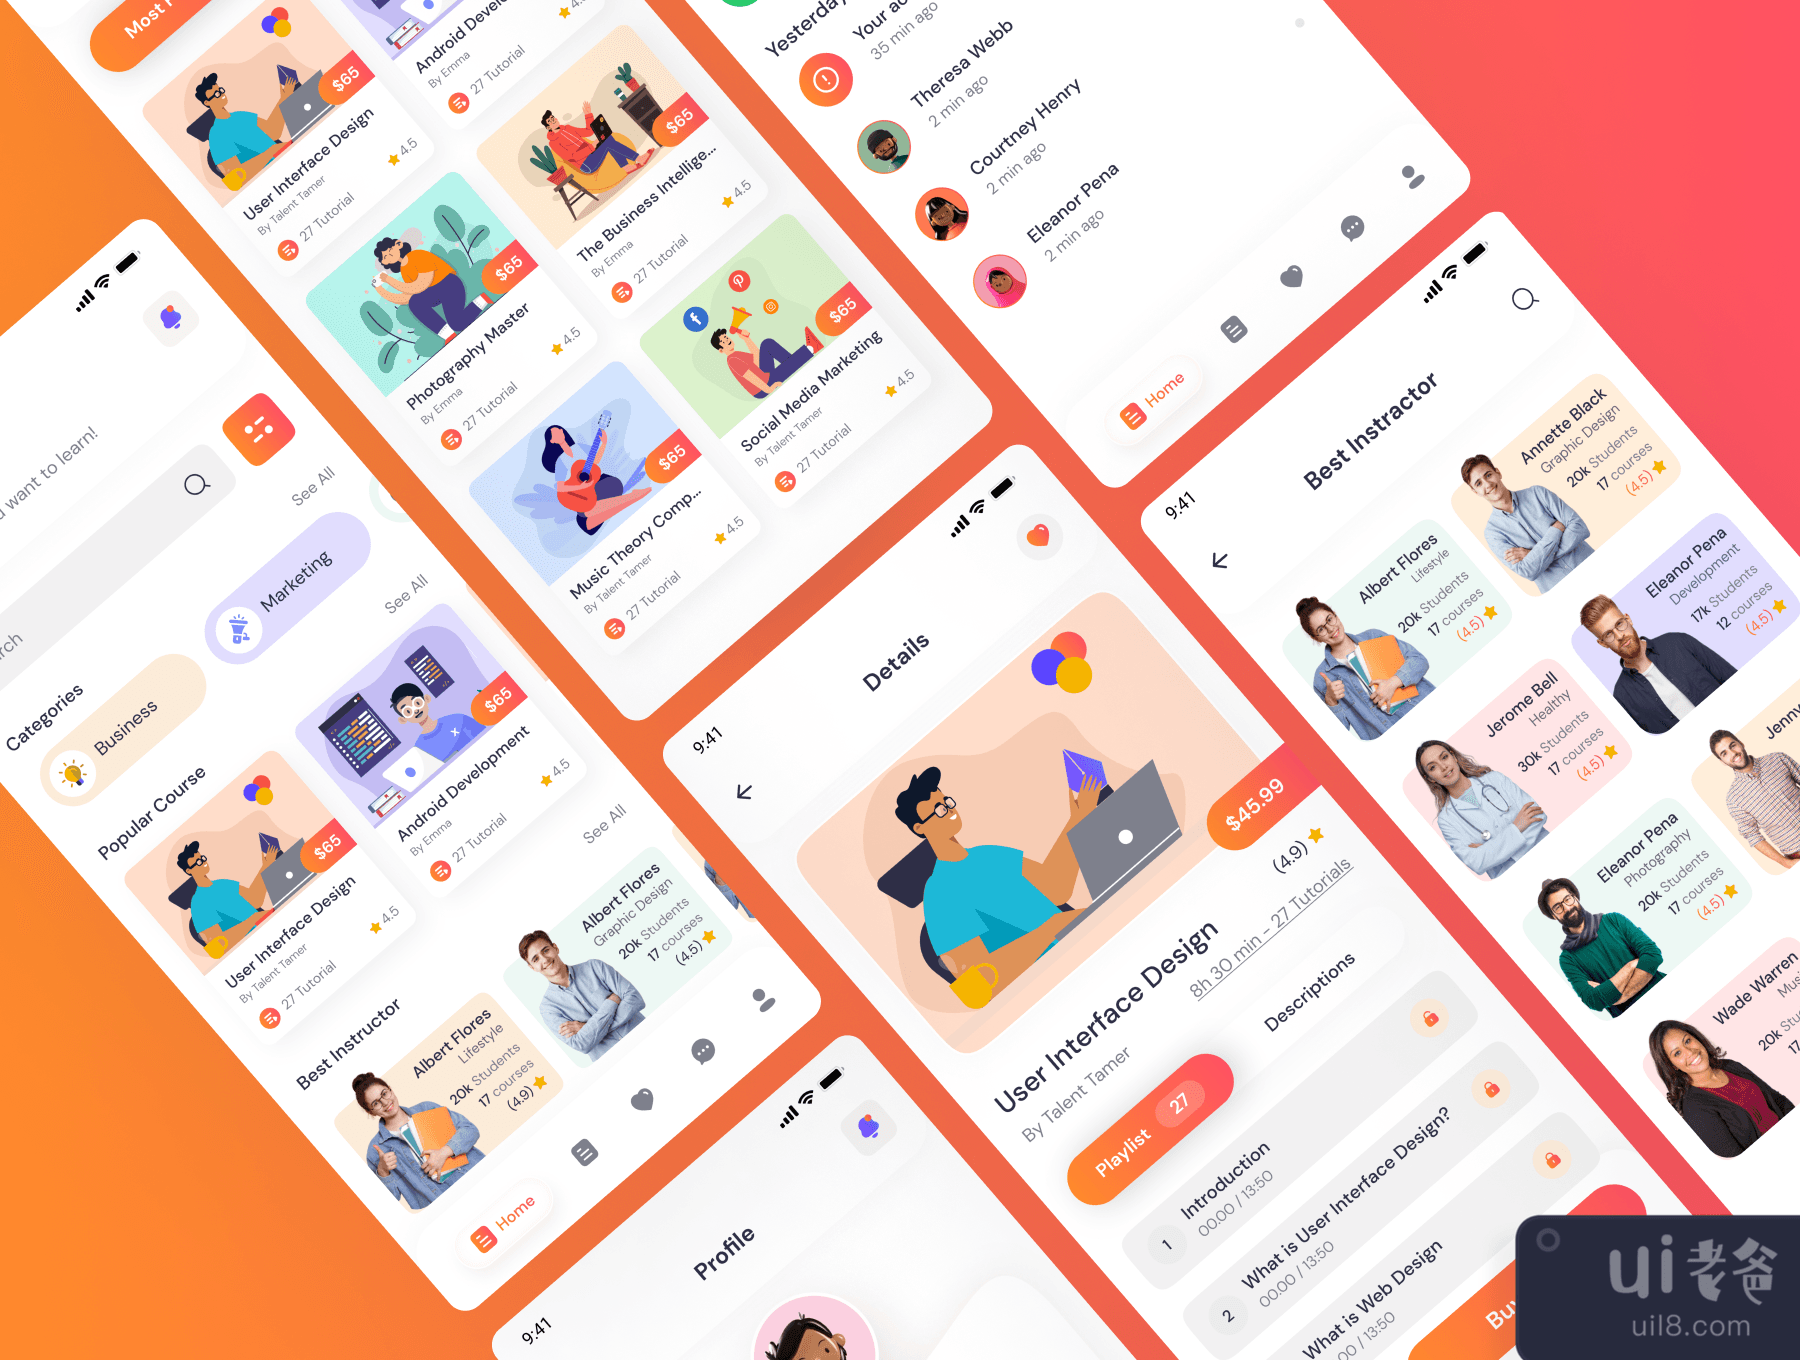 Maan LMS-学生移动应用 Flutter iOS & Android UI Kit (Maan LMS- Student Mobile App Flutter iOS & Android UI Kit)插图2